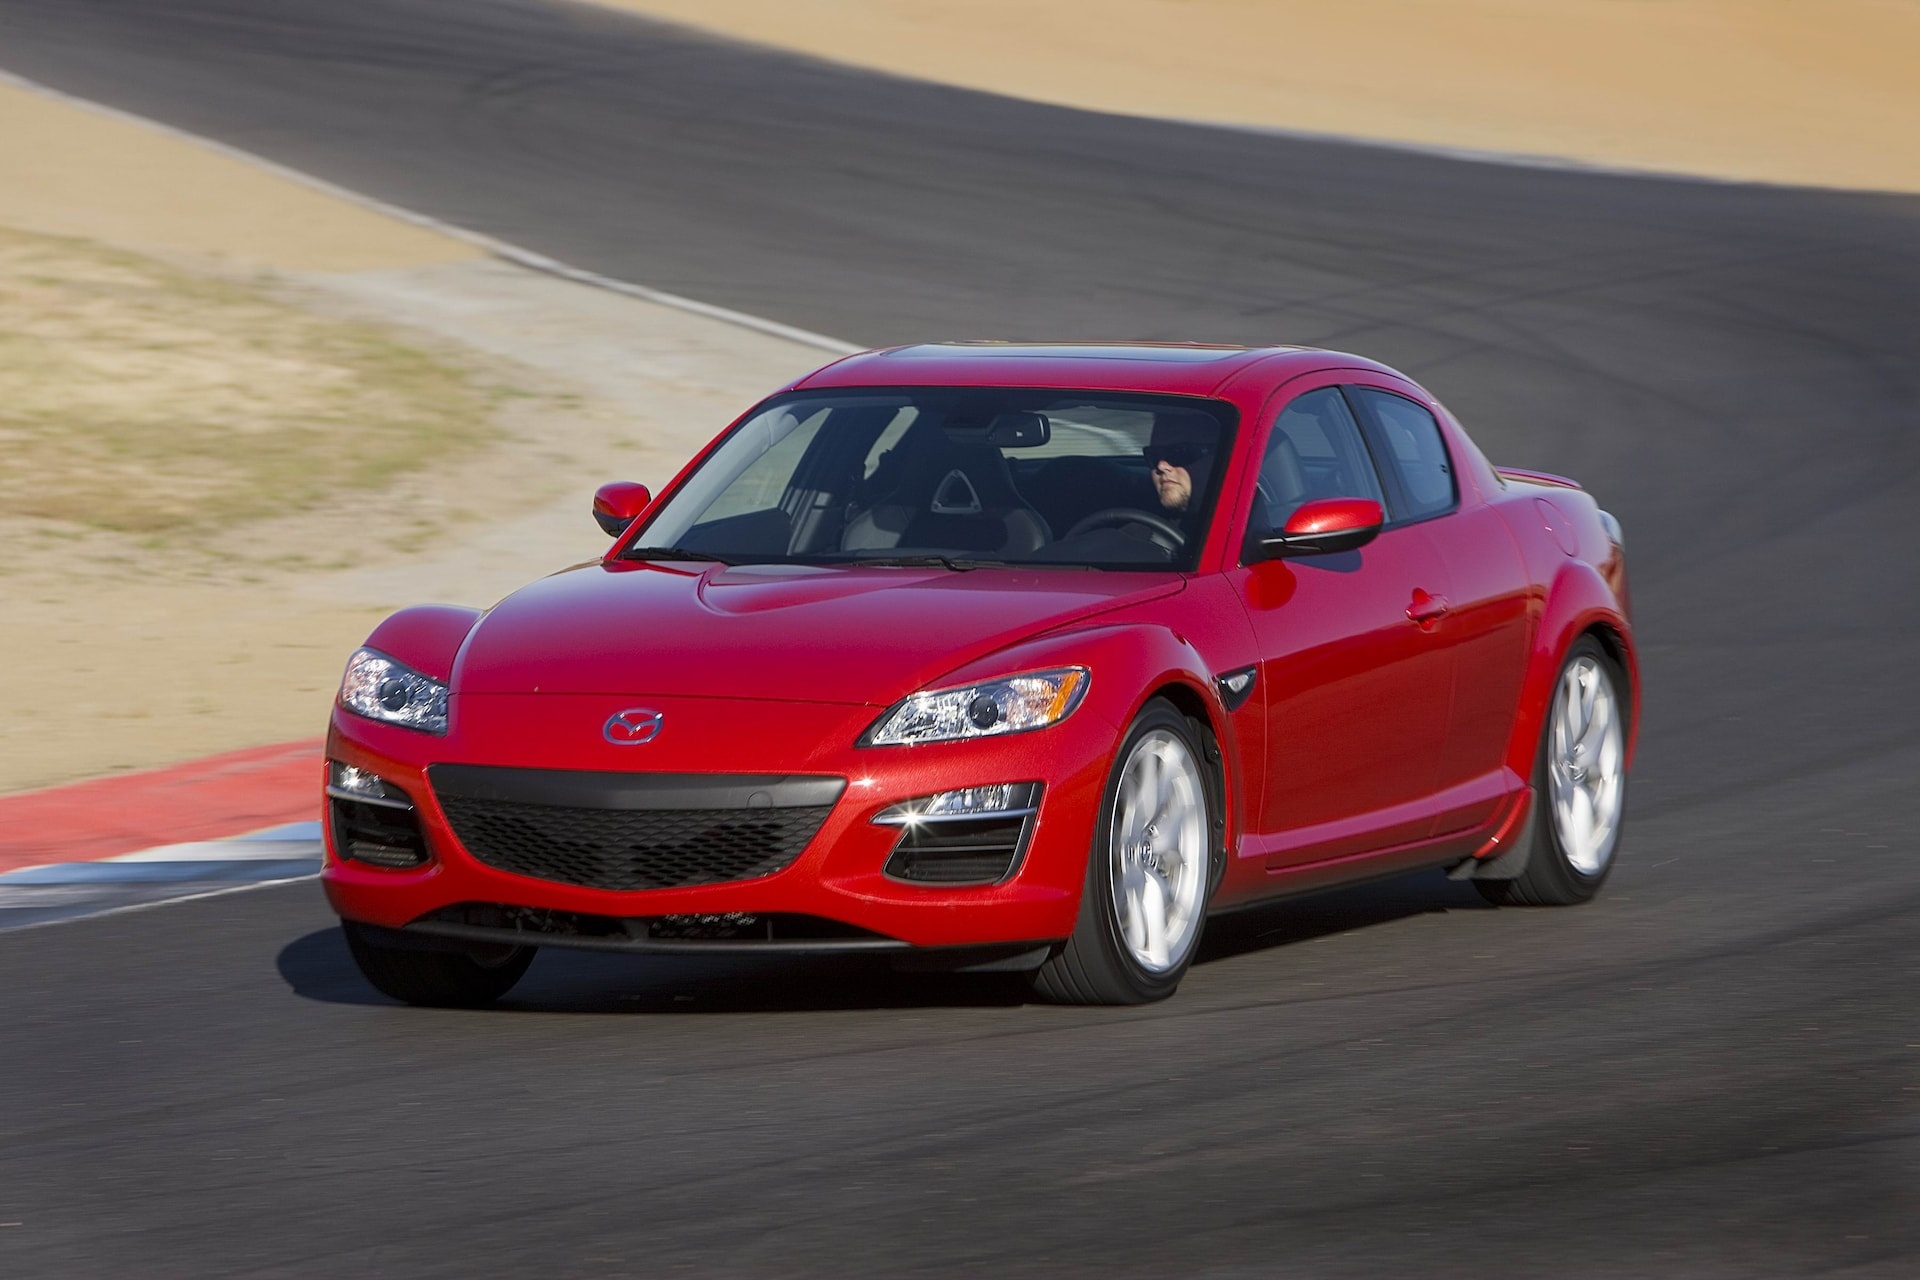 Mazda RX 8, Grand Touring package, High-performance luxury, 1920x1280 HD Desktop